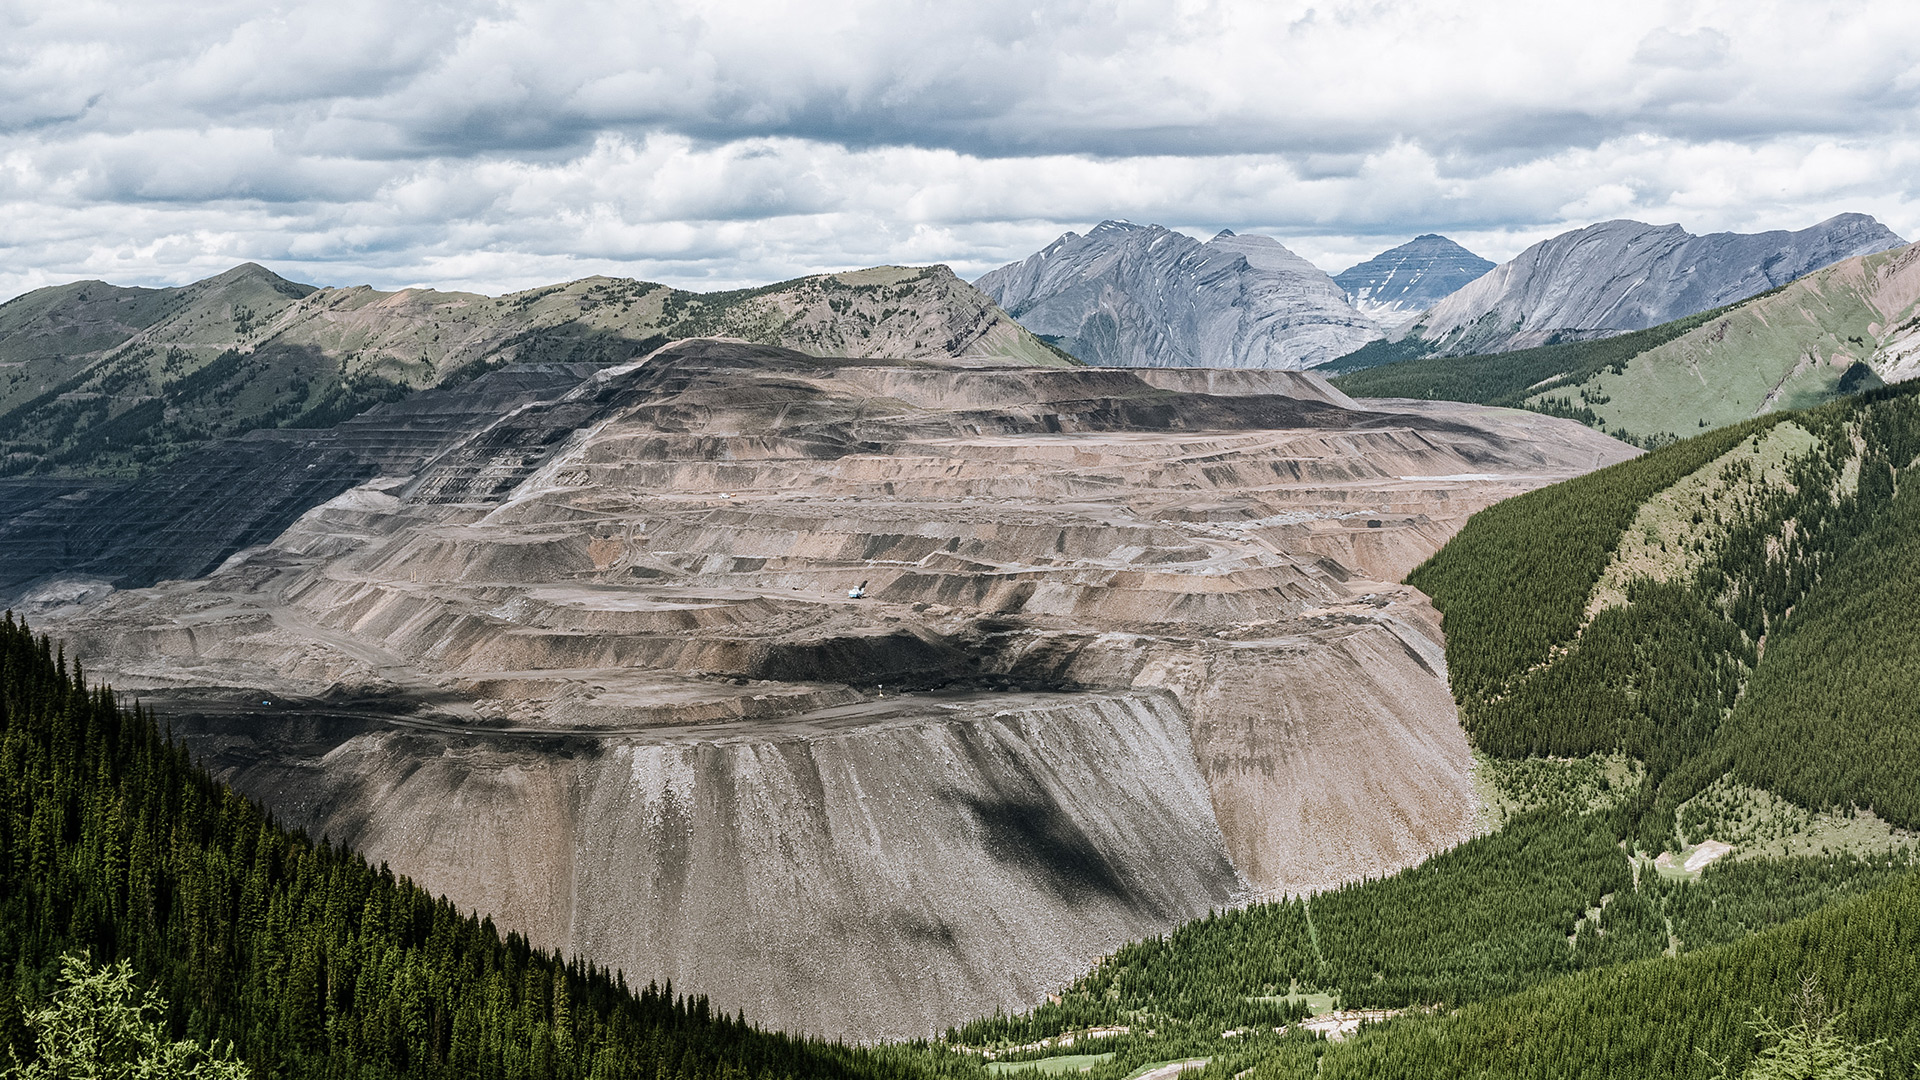 a desolate open pit mine surrounded by trees and mountains